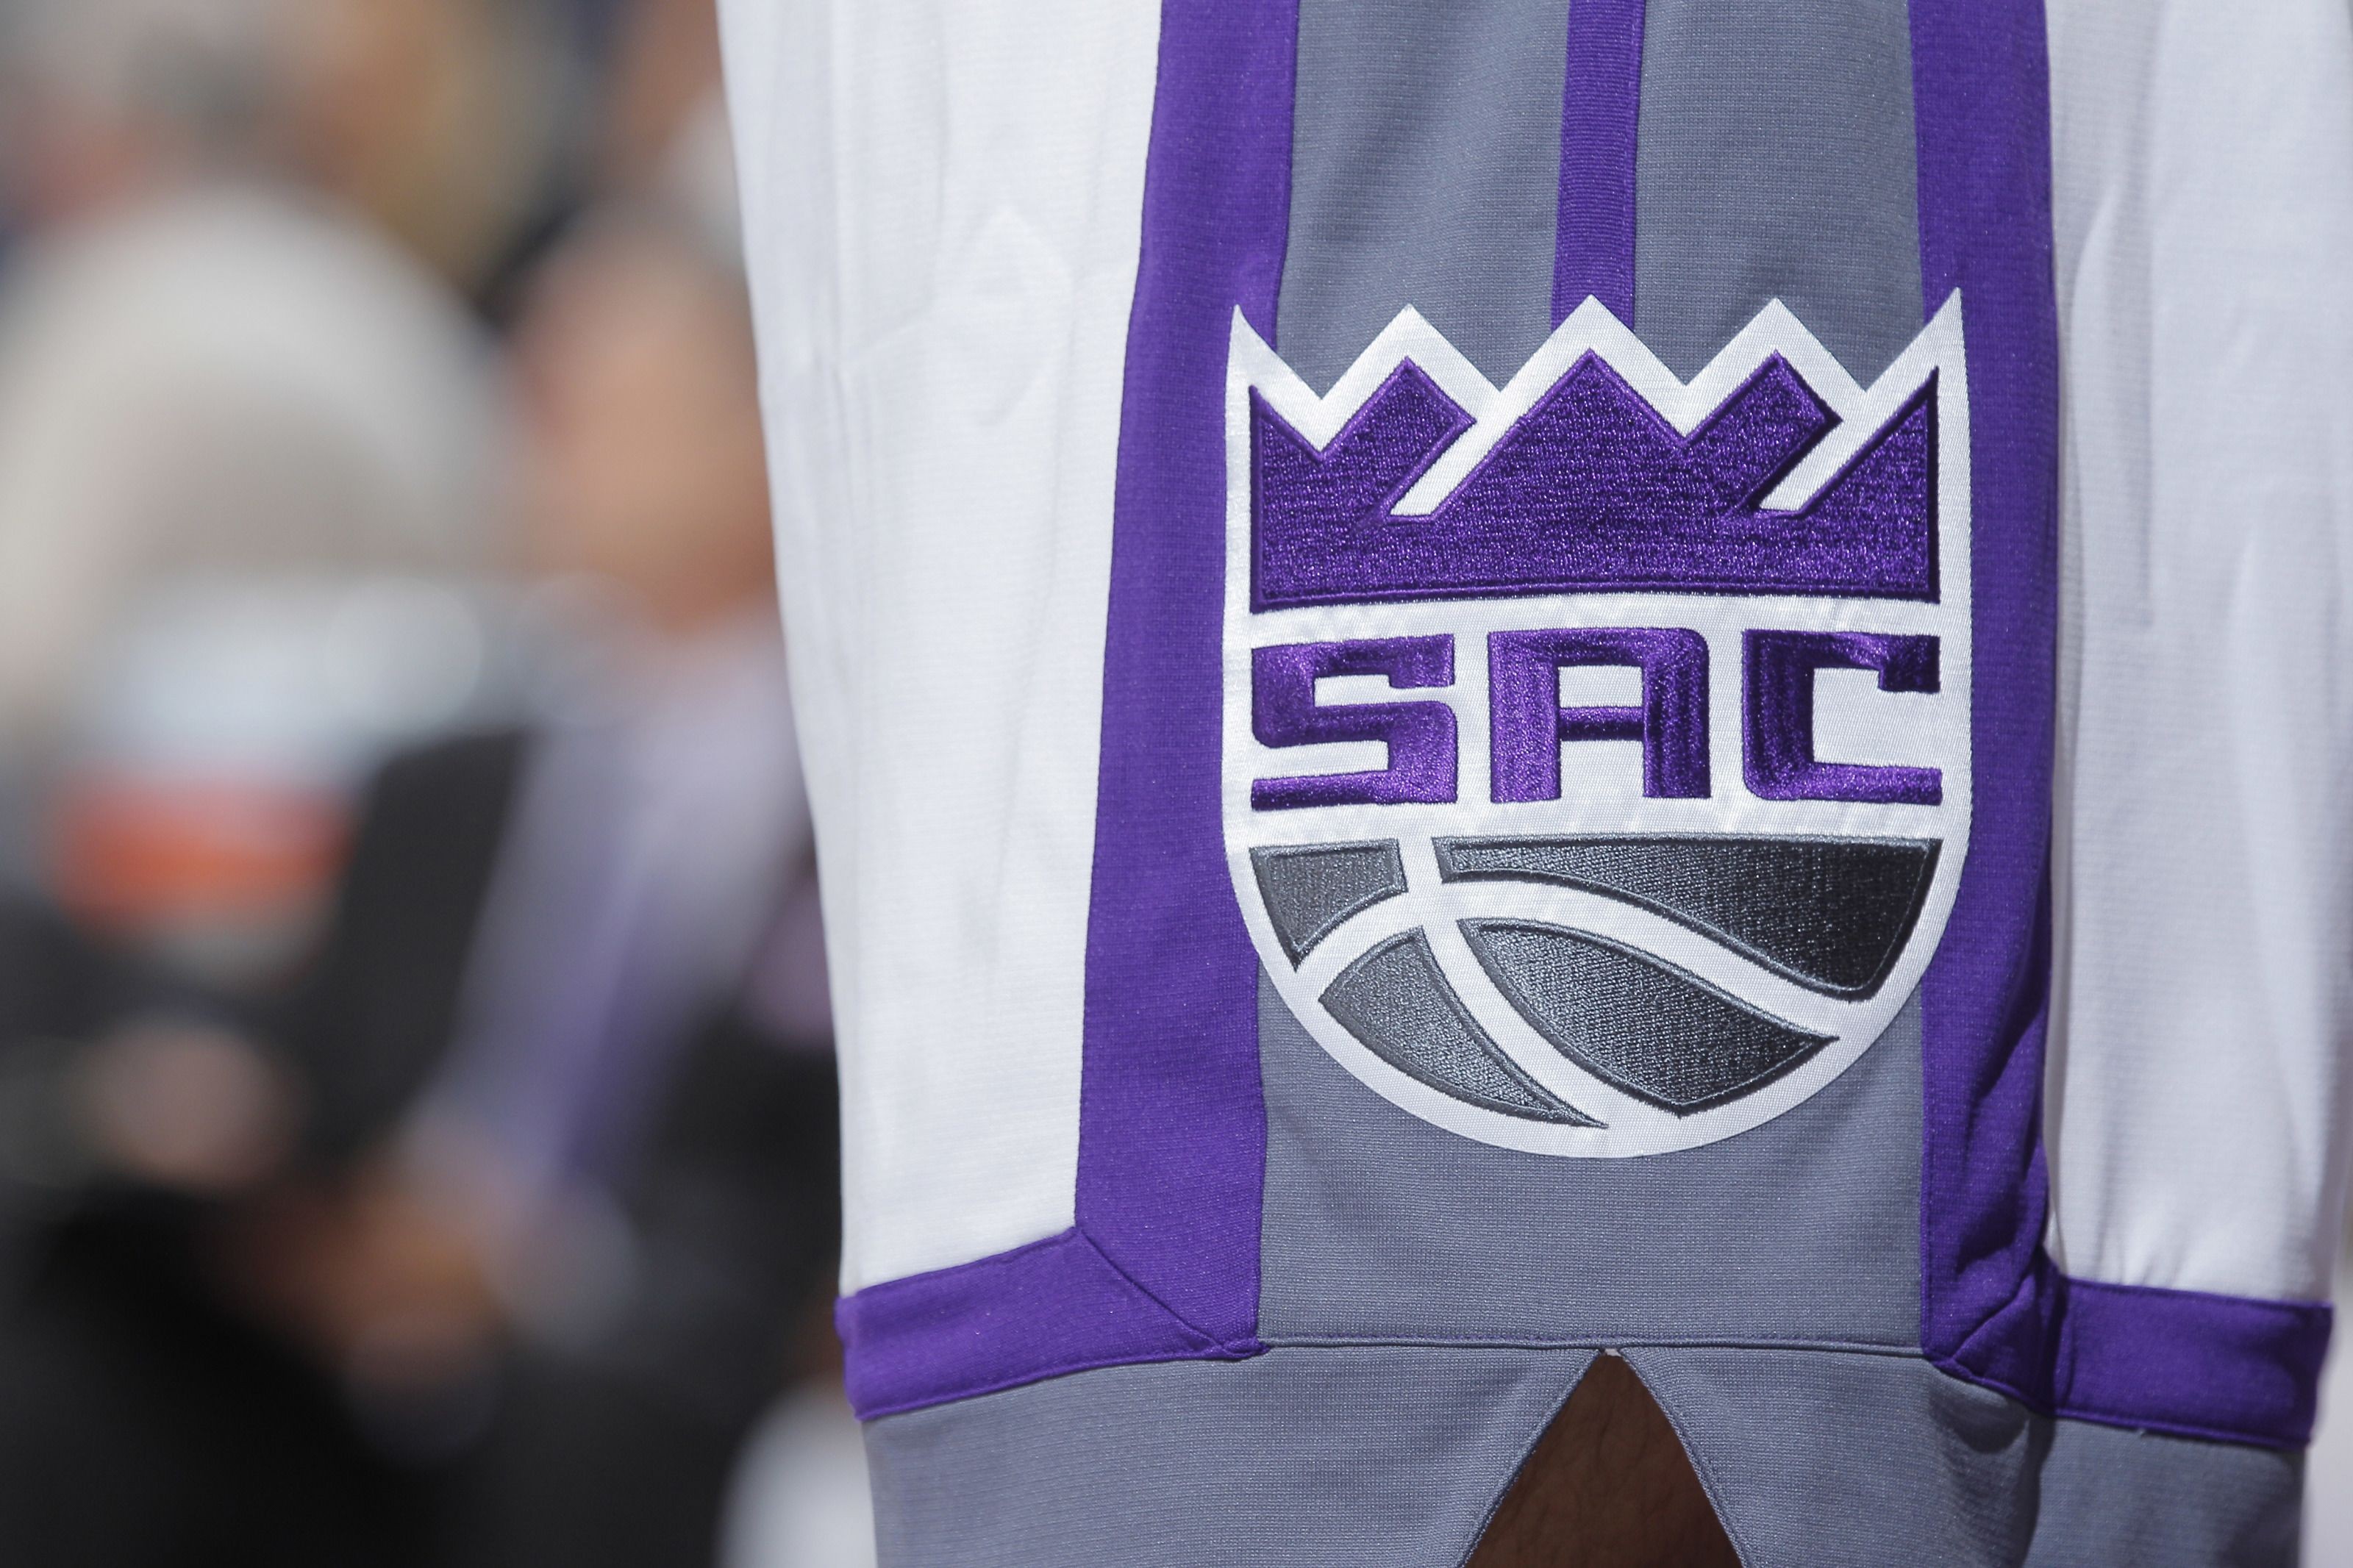 Sacramento Kings Thoughts On The New City Edition Uniforms